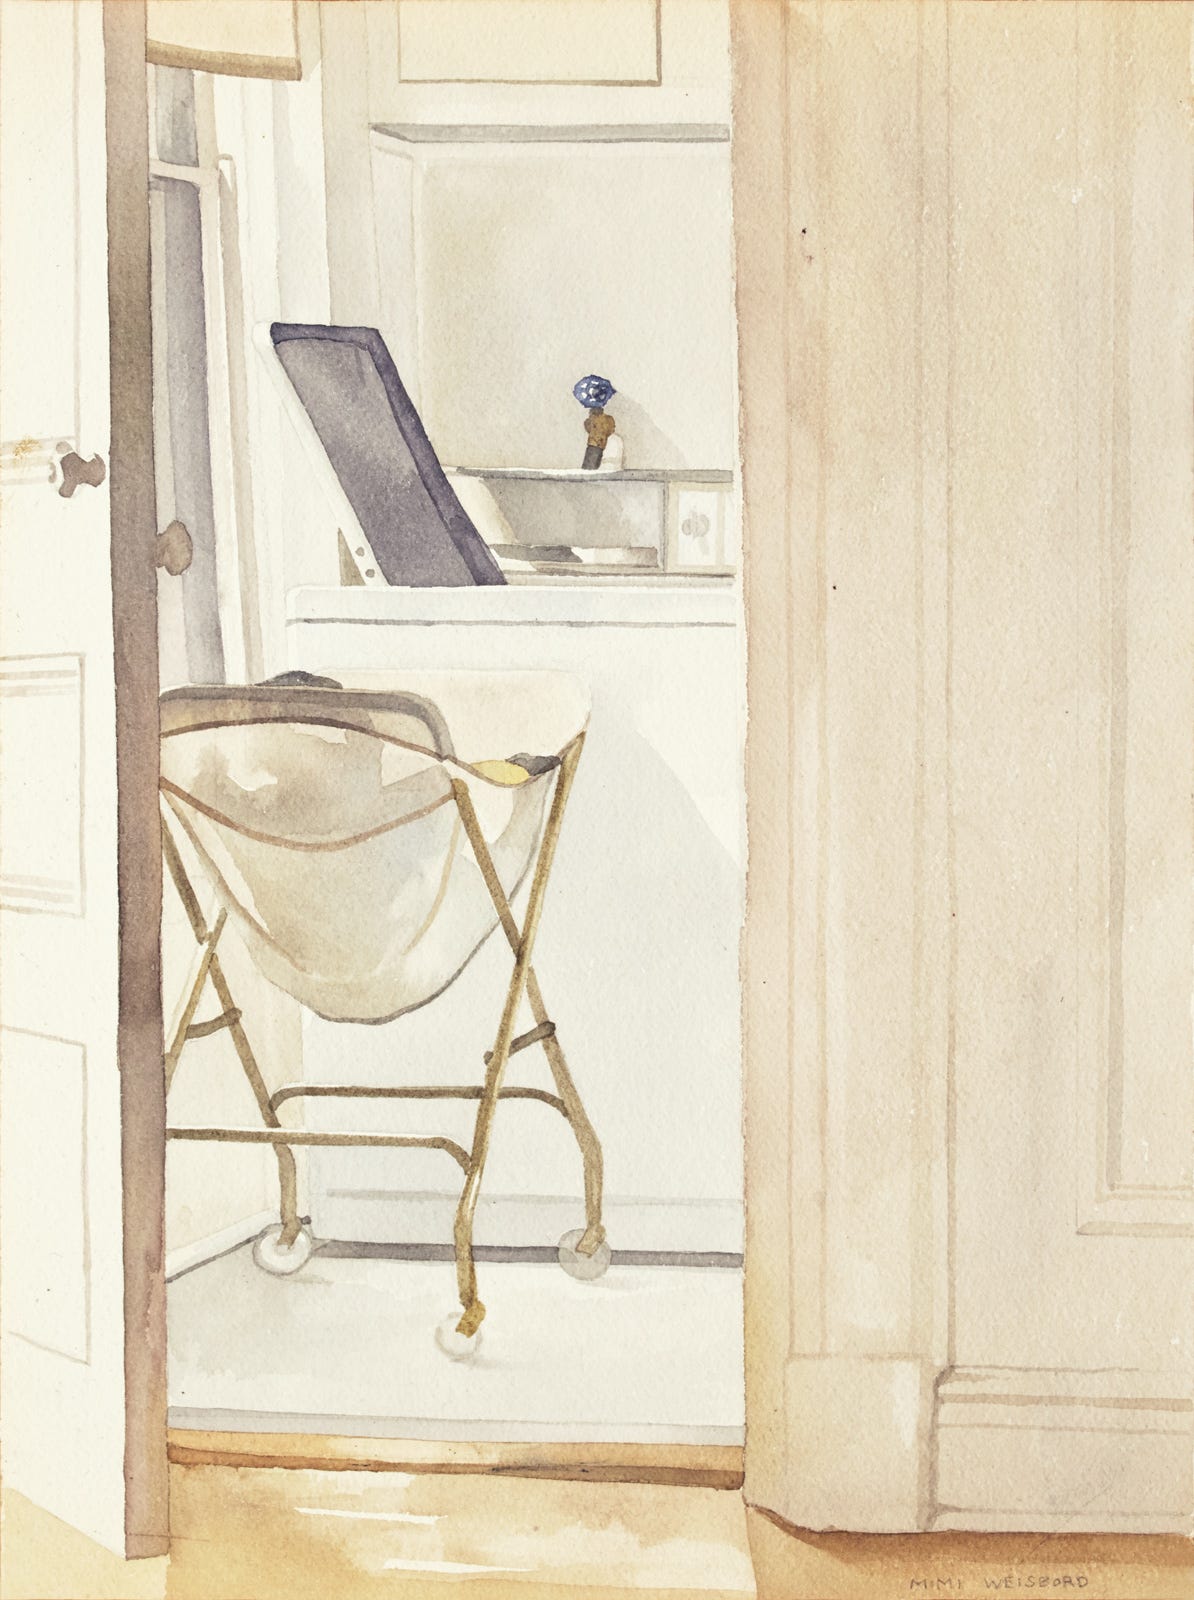 Watercolor of a doorway to laundry room with hamper and machine with open lid.